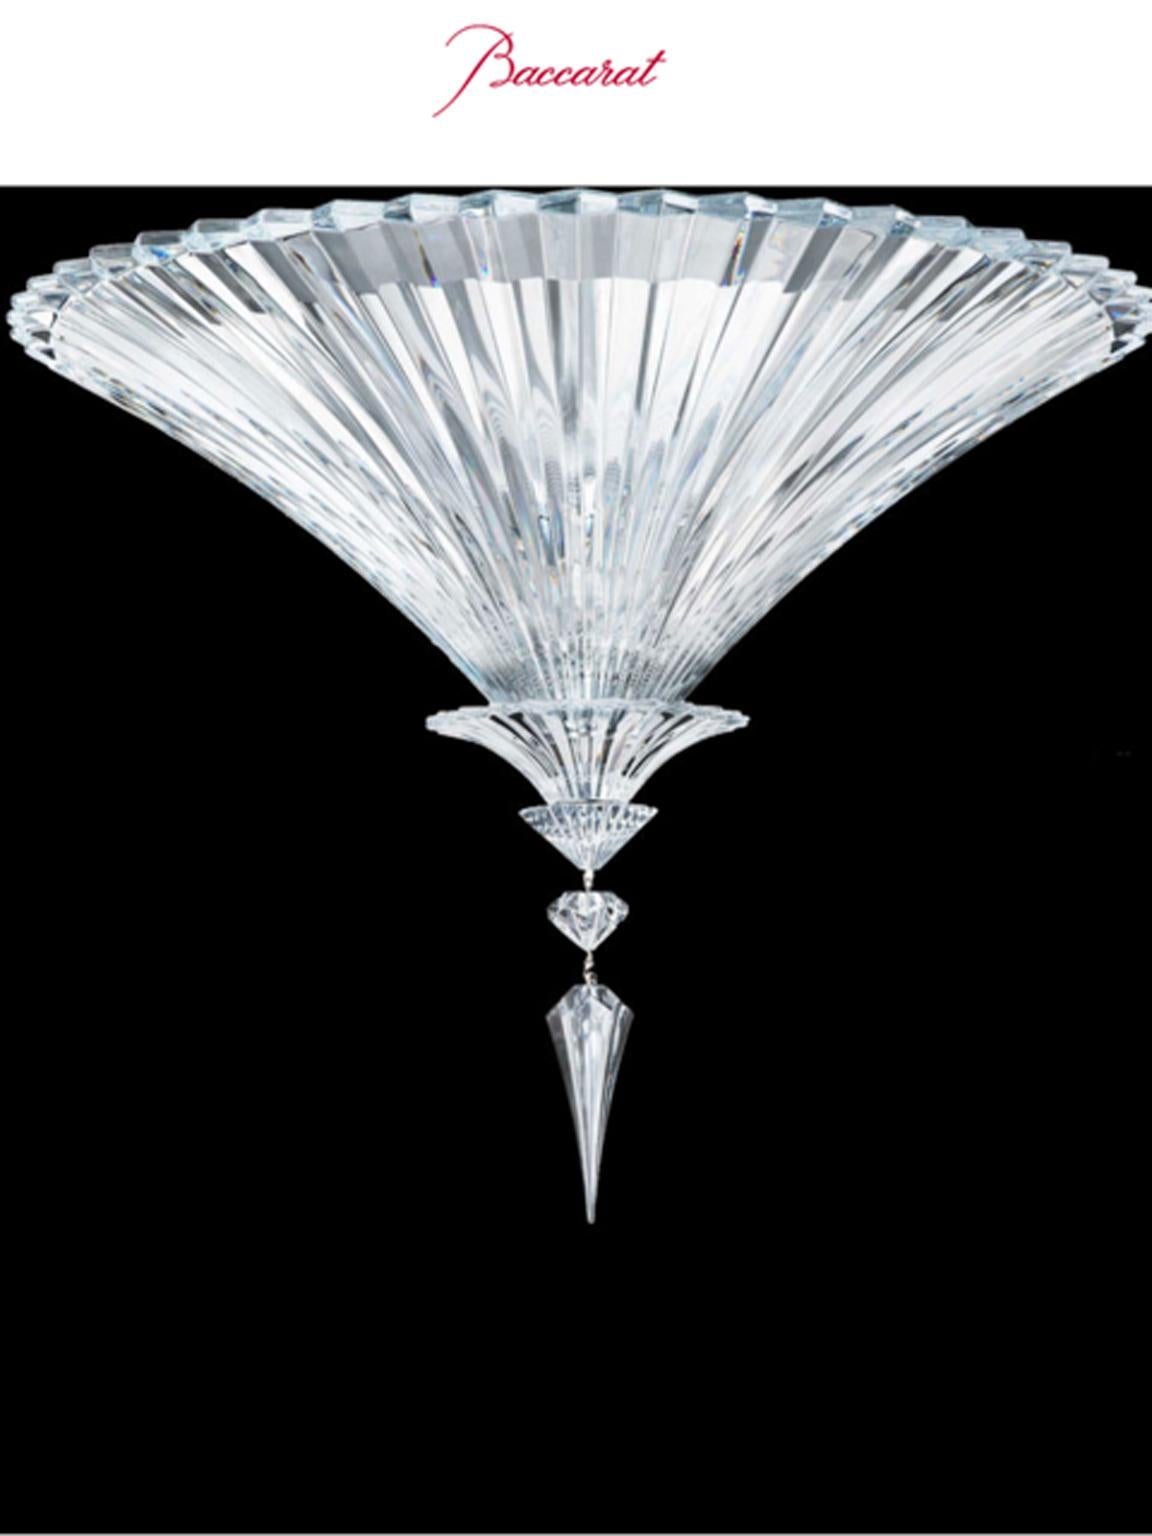 Set 3 Baccarat mille Nuit ceiling unit small size in clear crystal.
Pieces coming out from our showroom in perfect conditions.